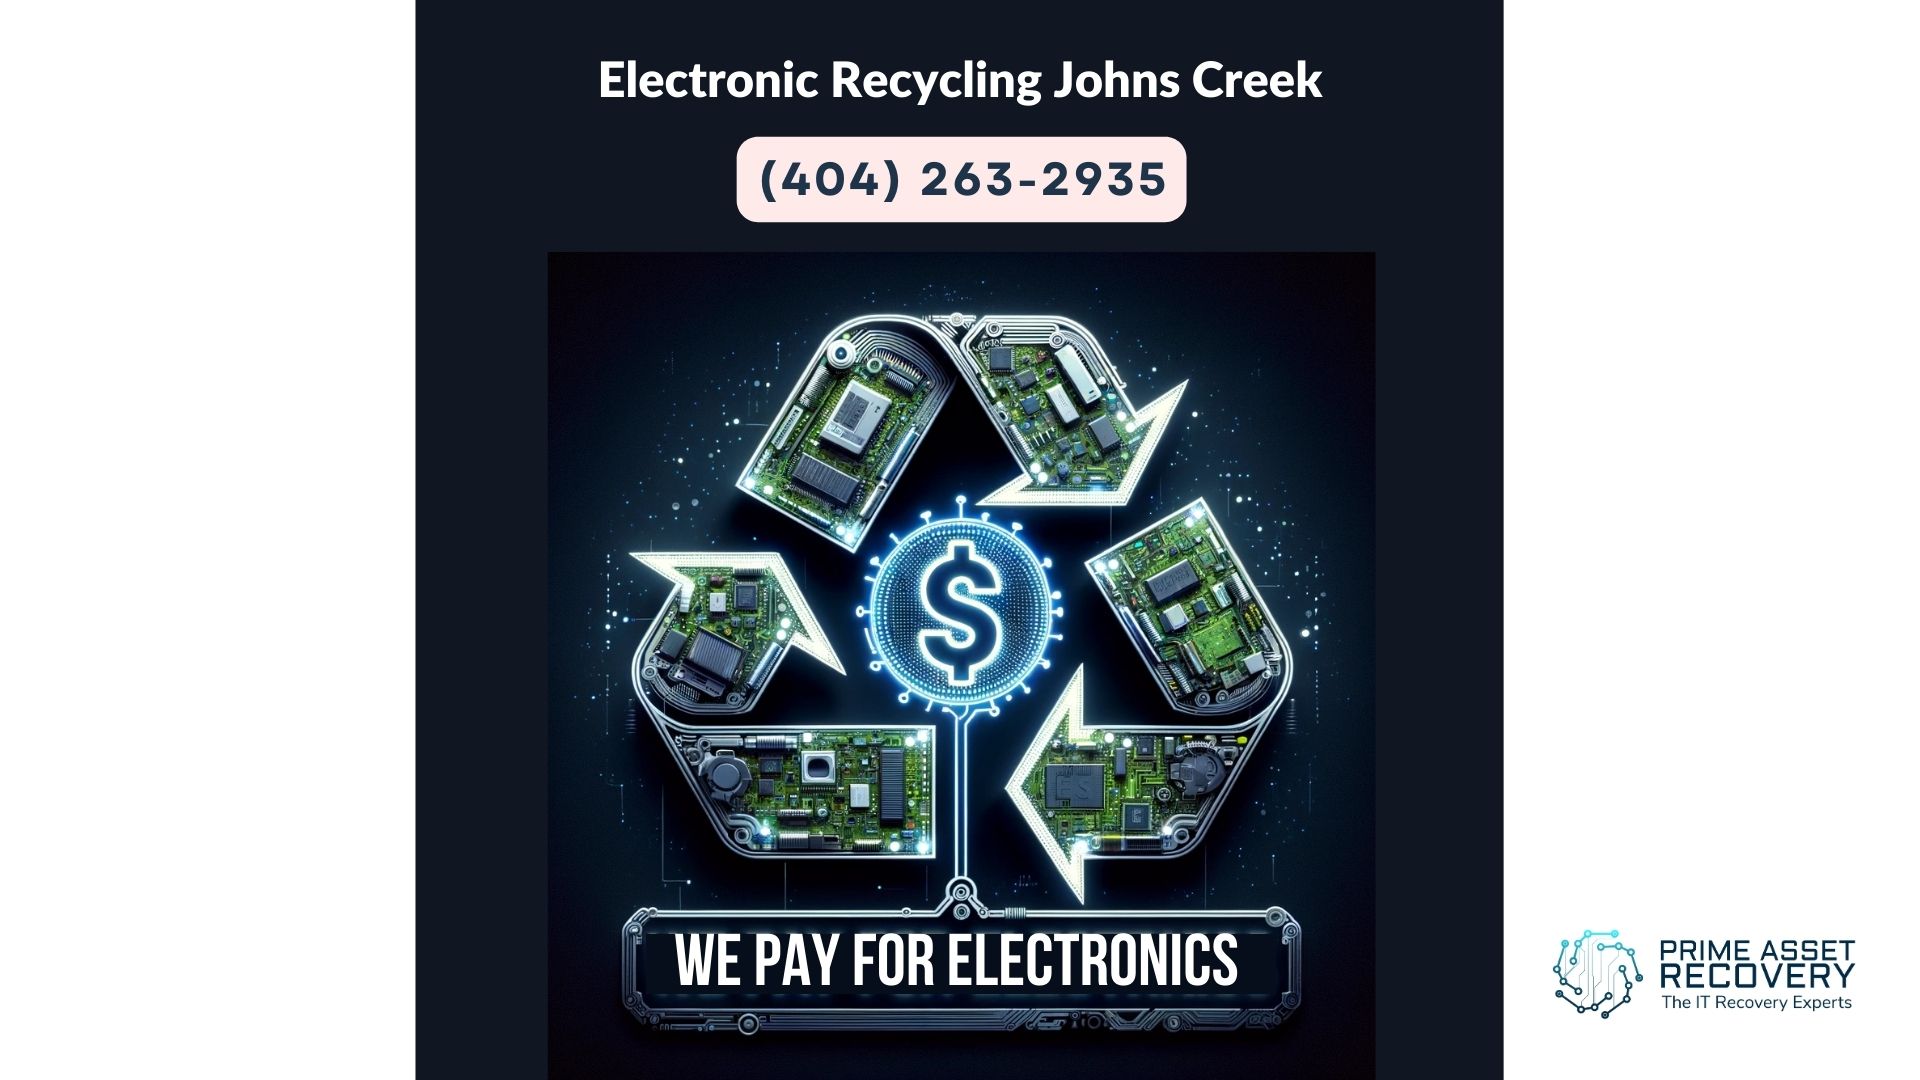 Computer Electronic Recycling Johns Creek - Prime Asset Recovery Your Partner in Responsible Electronics Recycling